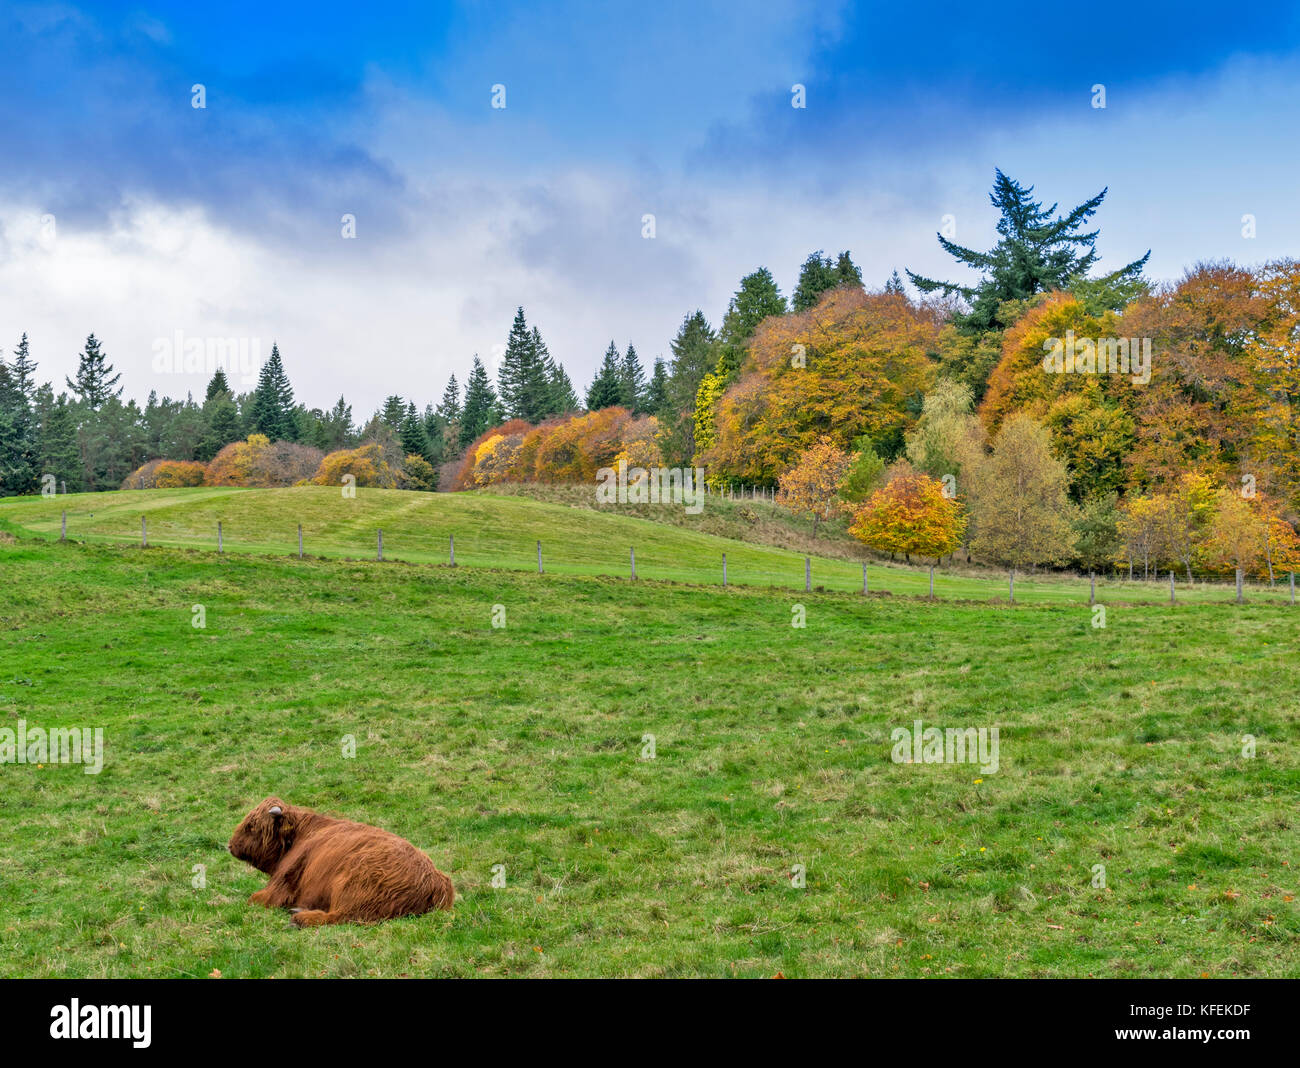 BALMORAL CASTLE ROYAL DEESIDE ABERDEENSHIRE SCOTLAND  THE BALMORAL GOLF COURSE SURROUNDED BY YELLOW AND GOLD AUTUMNAL TREES AND A HIGHLAND BULL IN THE Stock Photo